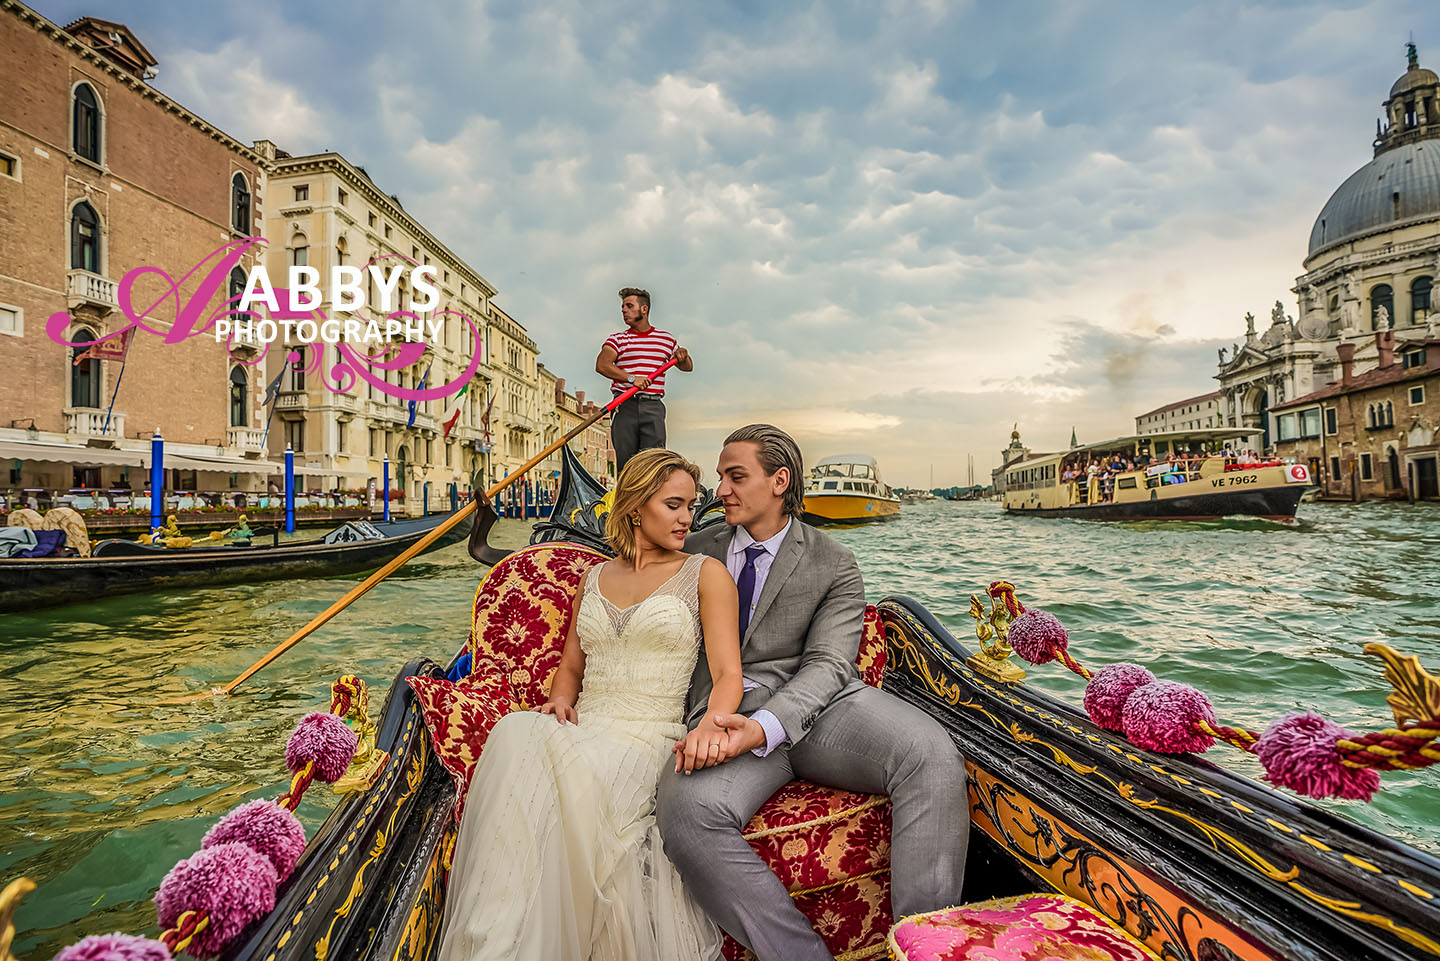 Abbys Photography can make you feel like your wedding or engagement is in Venice instead of Thousand Oaks. 